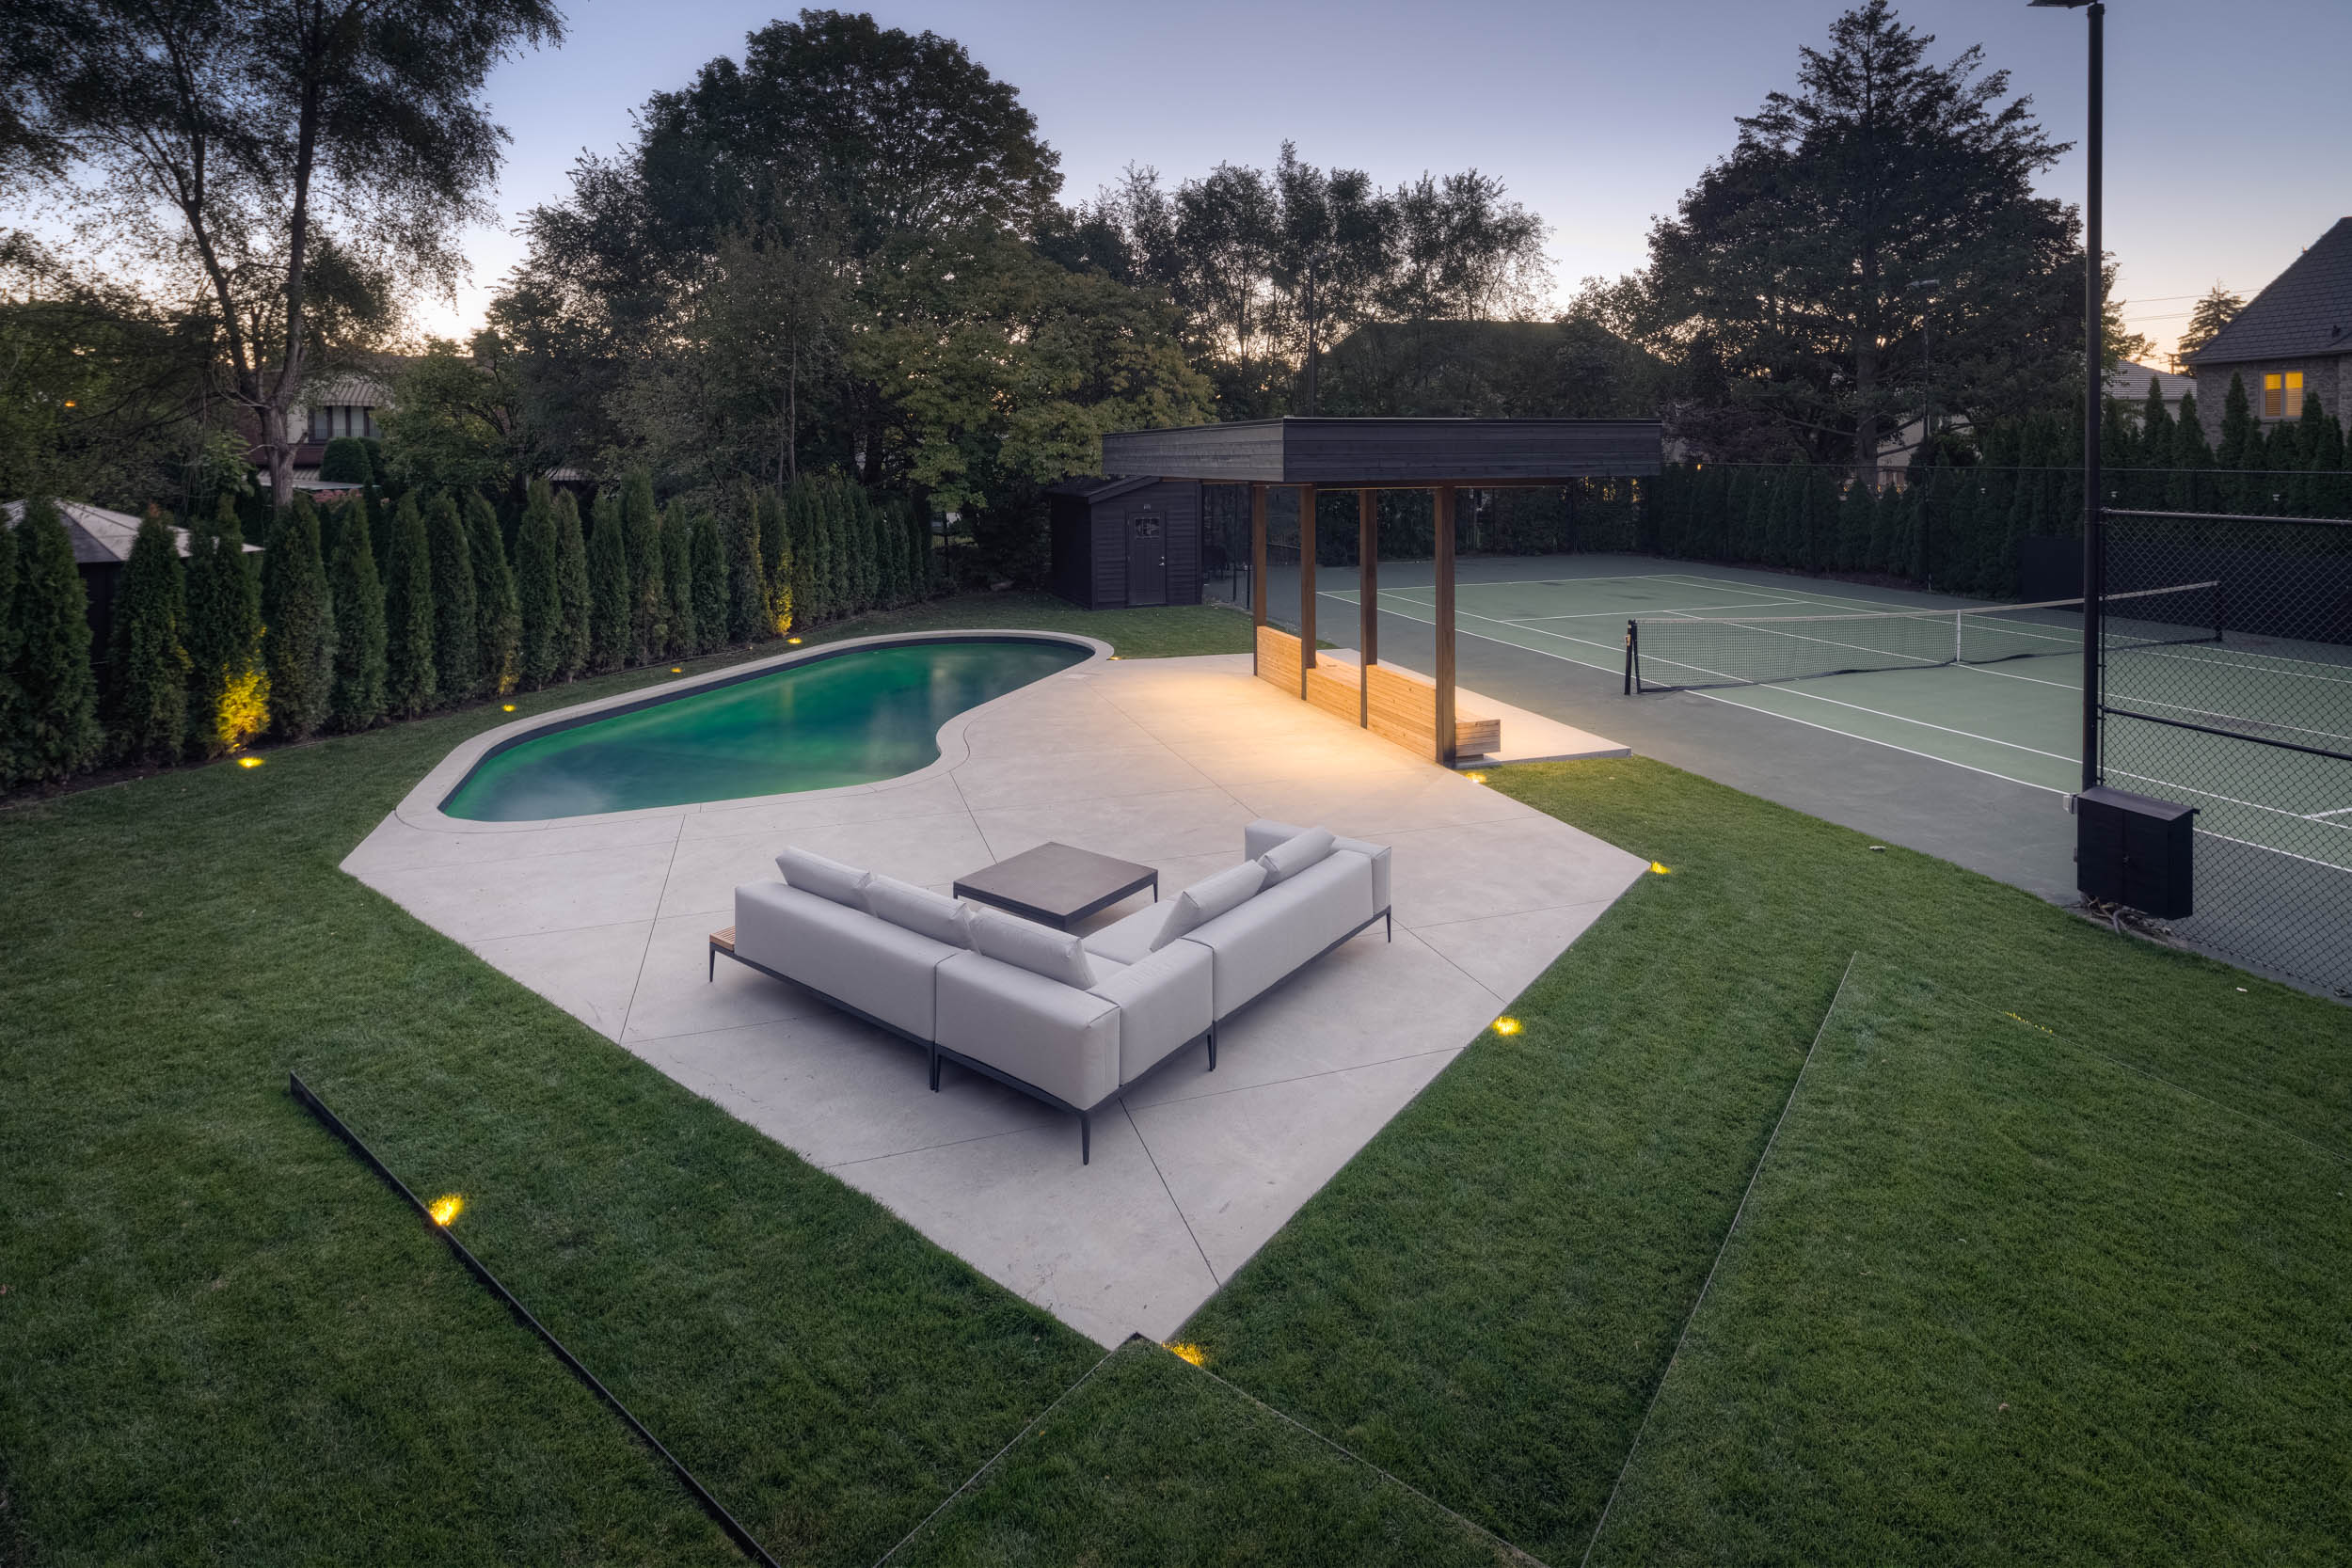 View of residential backyard with pool, tennis courts and outdoor seating. 